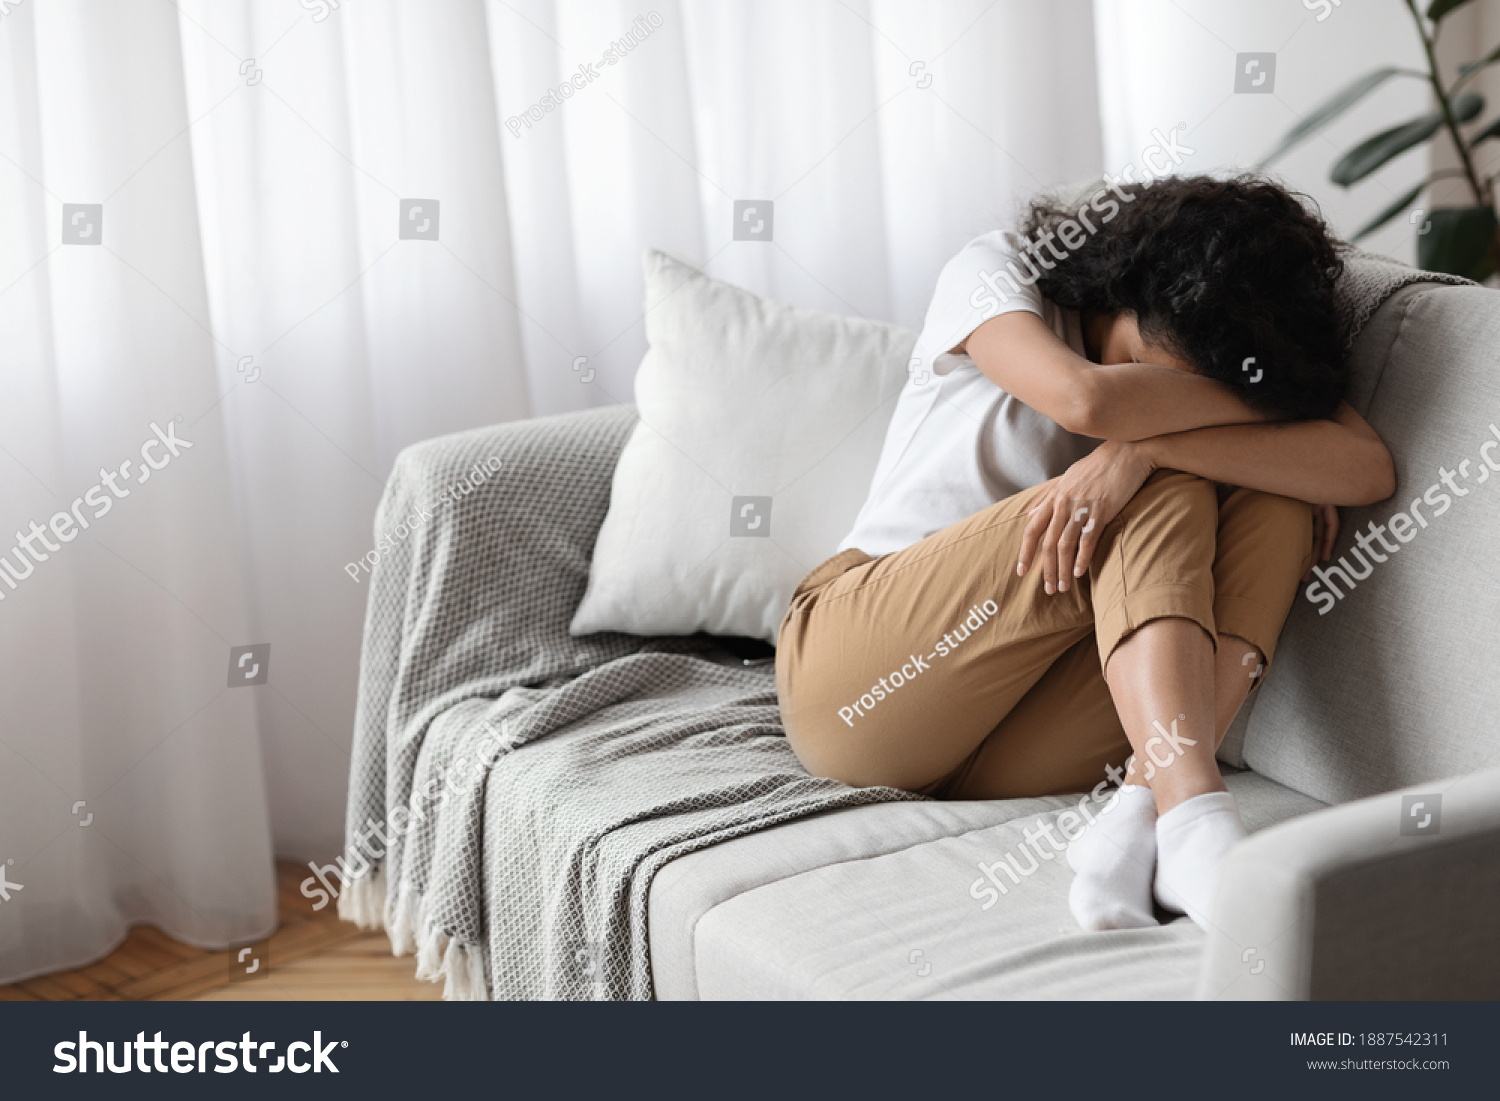 Depressed brunette woman sitting on couch at home alone, crying, suffering from loneliness during lockdown, copy space. Upset young lady having bad day, spending weekend on her own, feeling lonely #1887542311